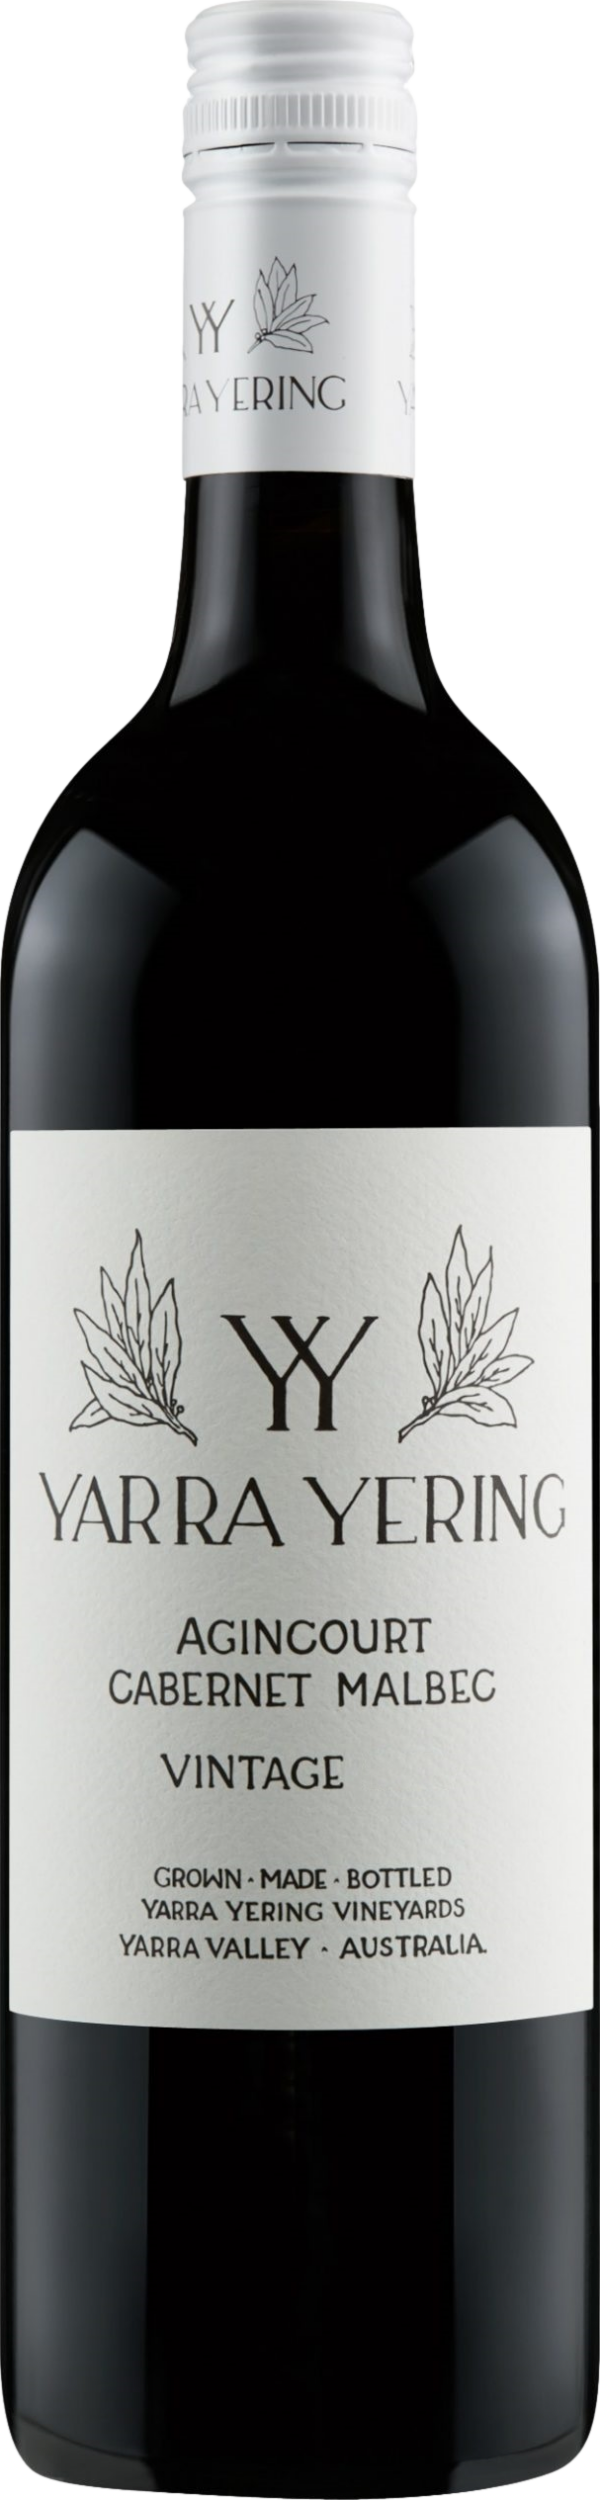 Product image of Yarra Yering Agincourt 2017 from 8wines